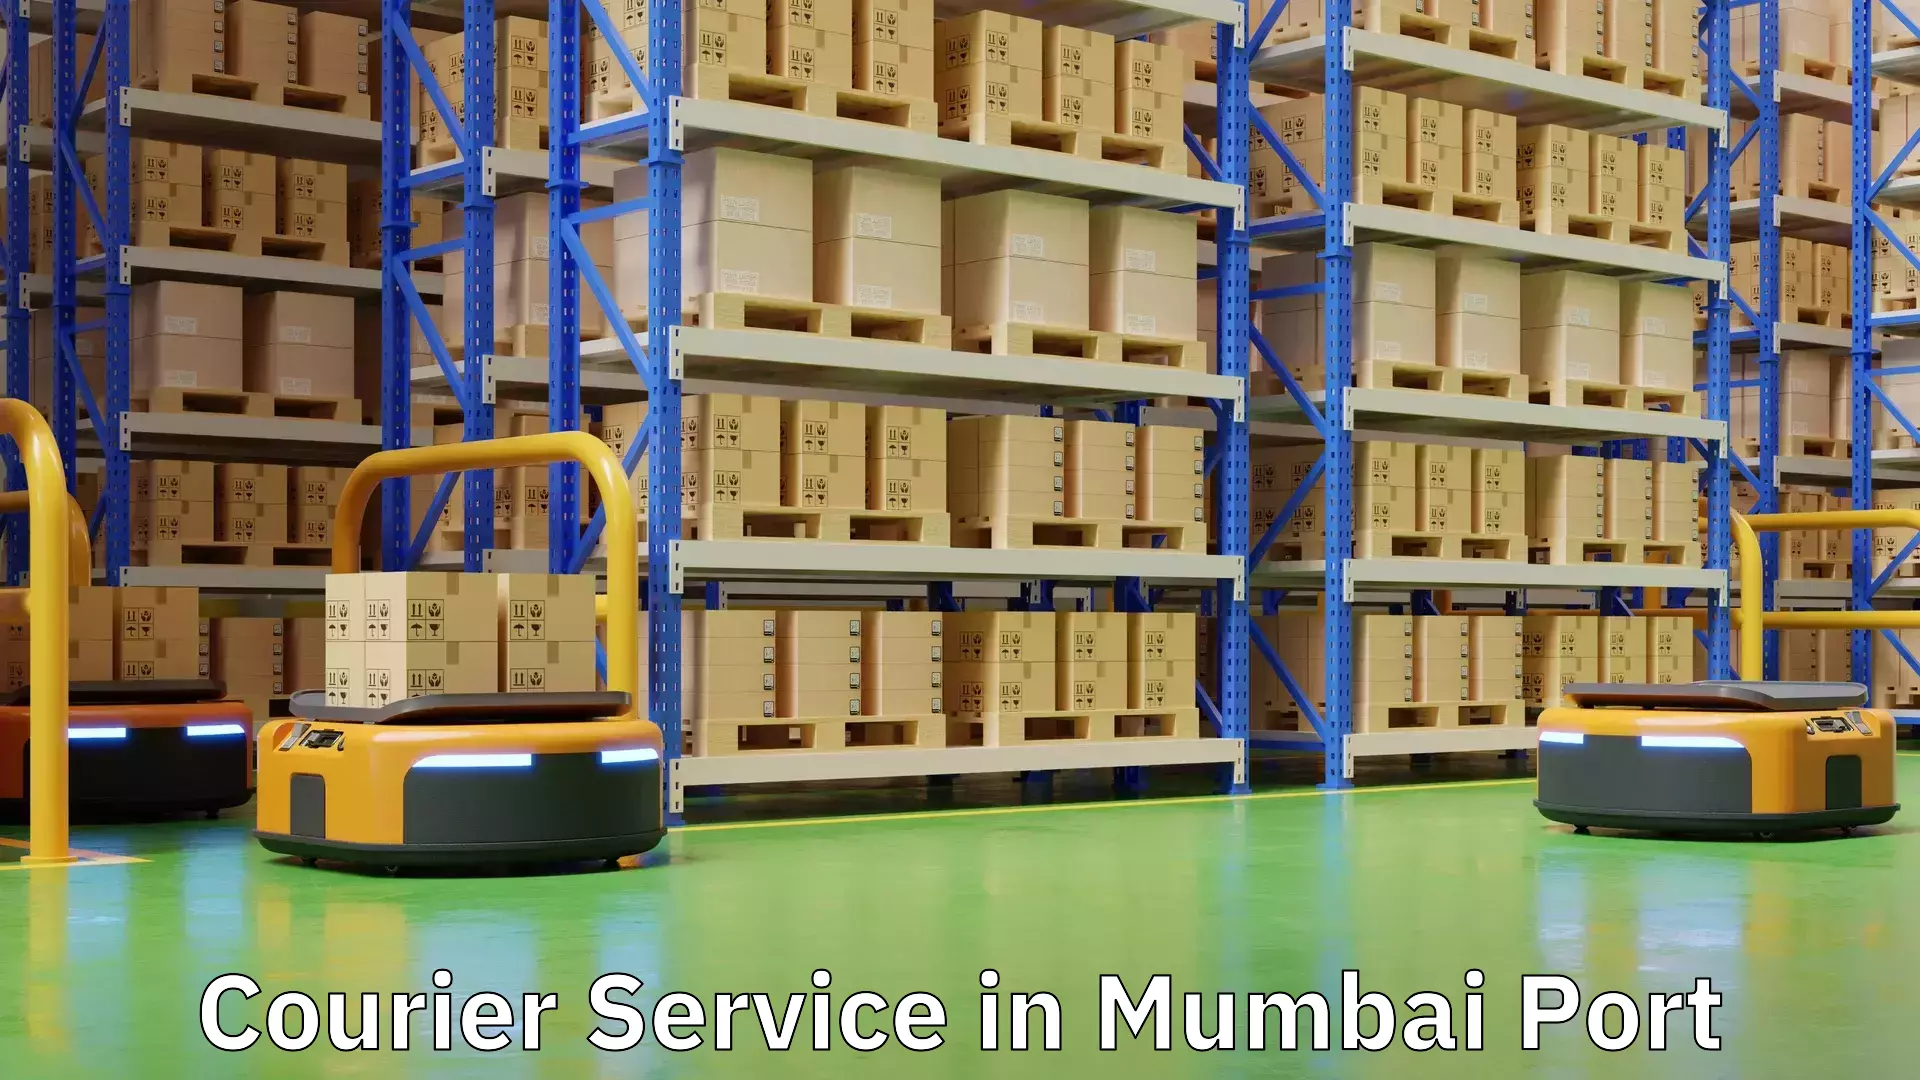 Comprehensive freight services in Mumbai Port